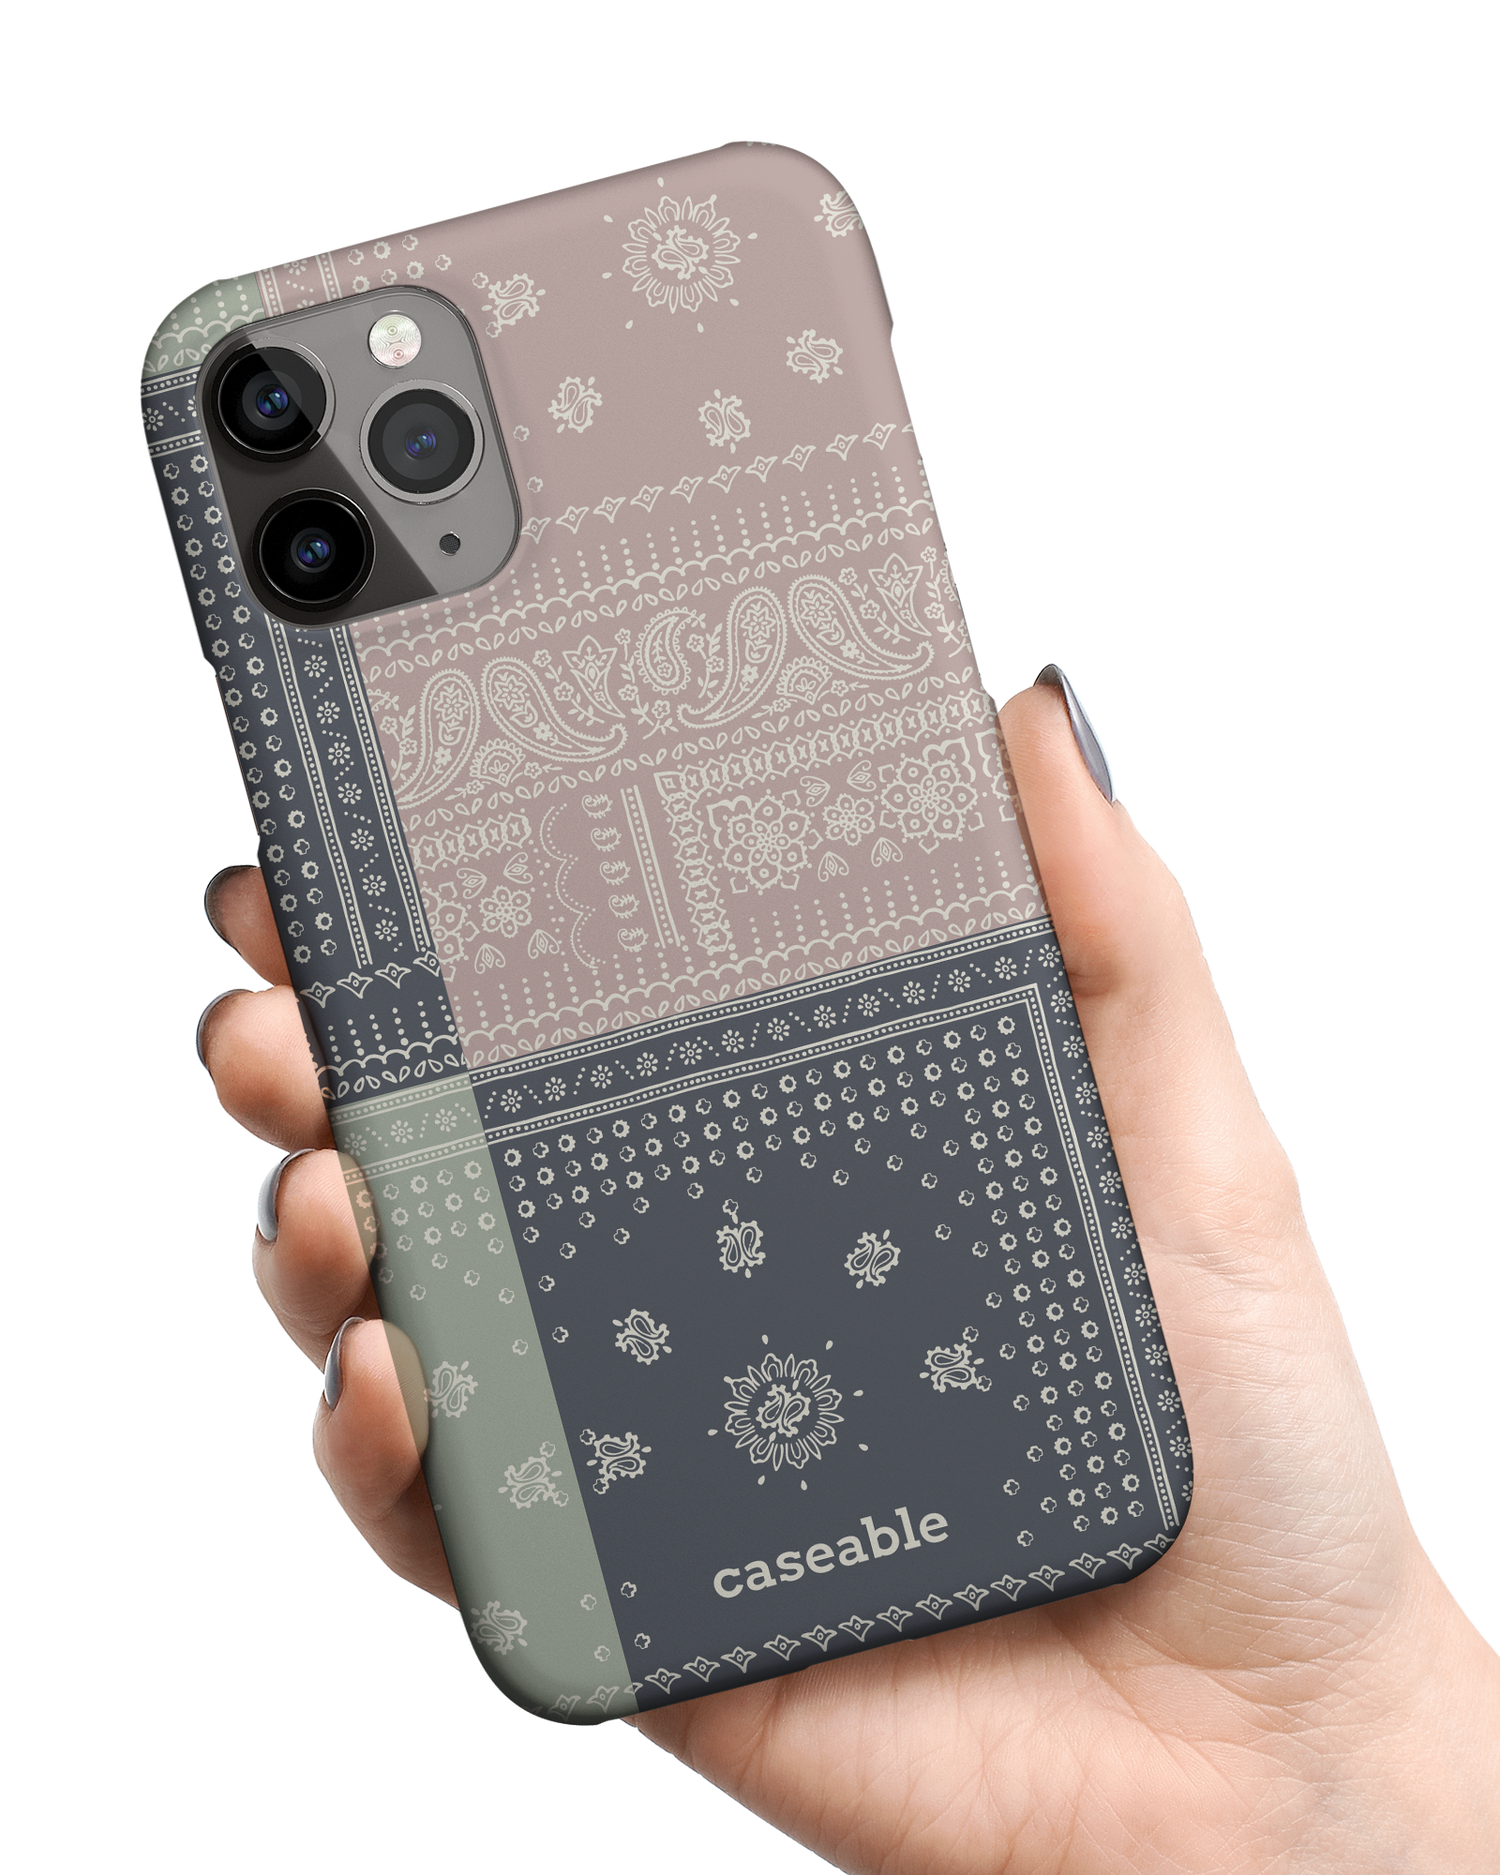 Bandana Patchwork Hard Shell Phone Case Apple iPhone 11 Pro Max held in hand